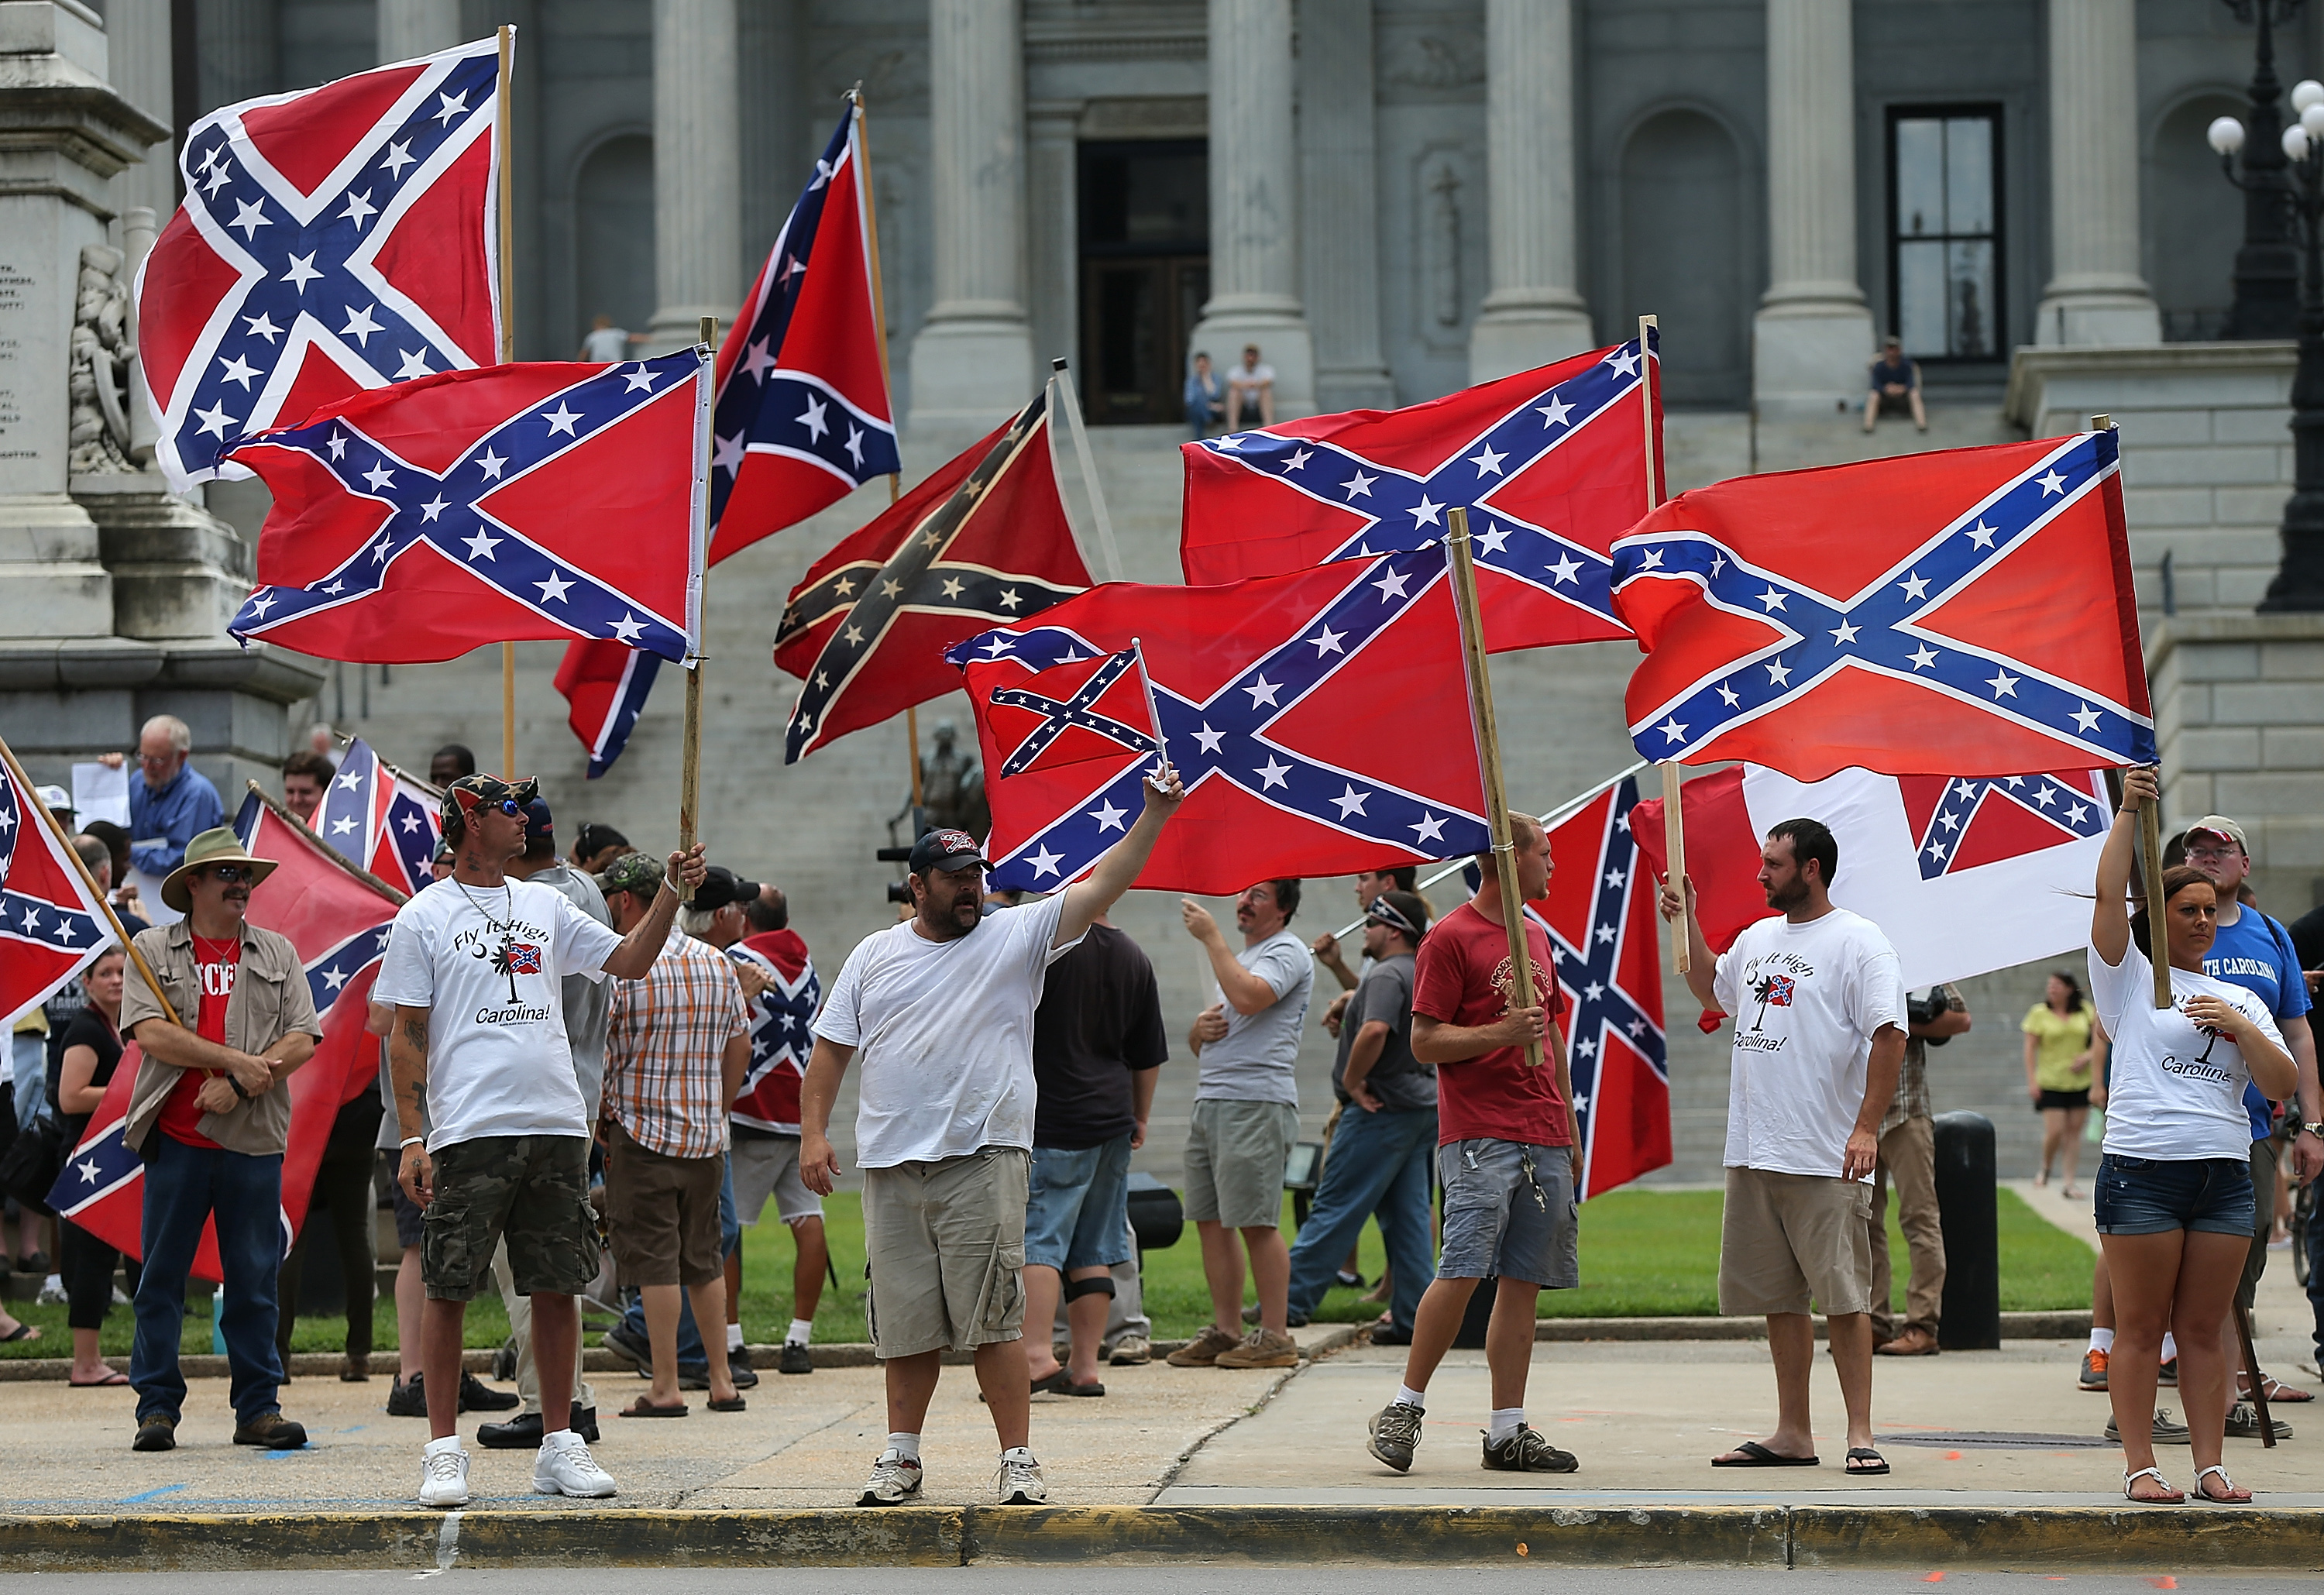 Demonstrators protest at the South Carolina State House calling for the Confederate flag to remain on the State House grounds. (Getty)